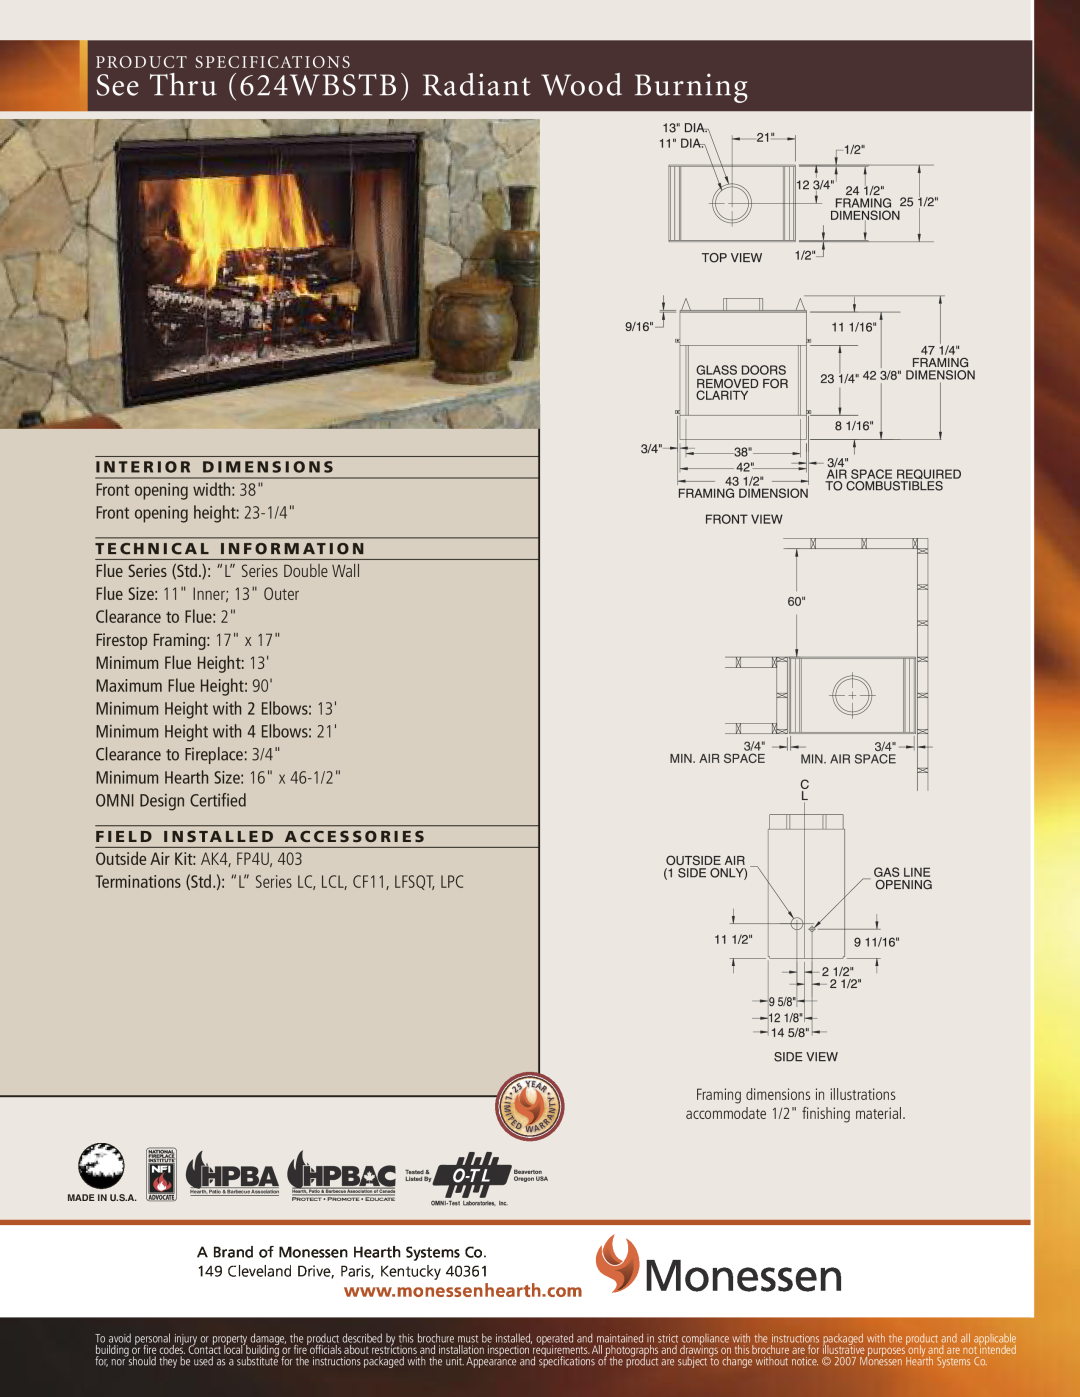 Monessen Hearth BWB400IA See Thru 624WBSTB Radiant Wood Burning, Hpba, Product Specifications, Flue Size 11 Inner 13 Outer 